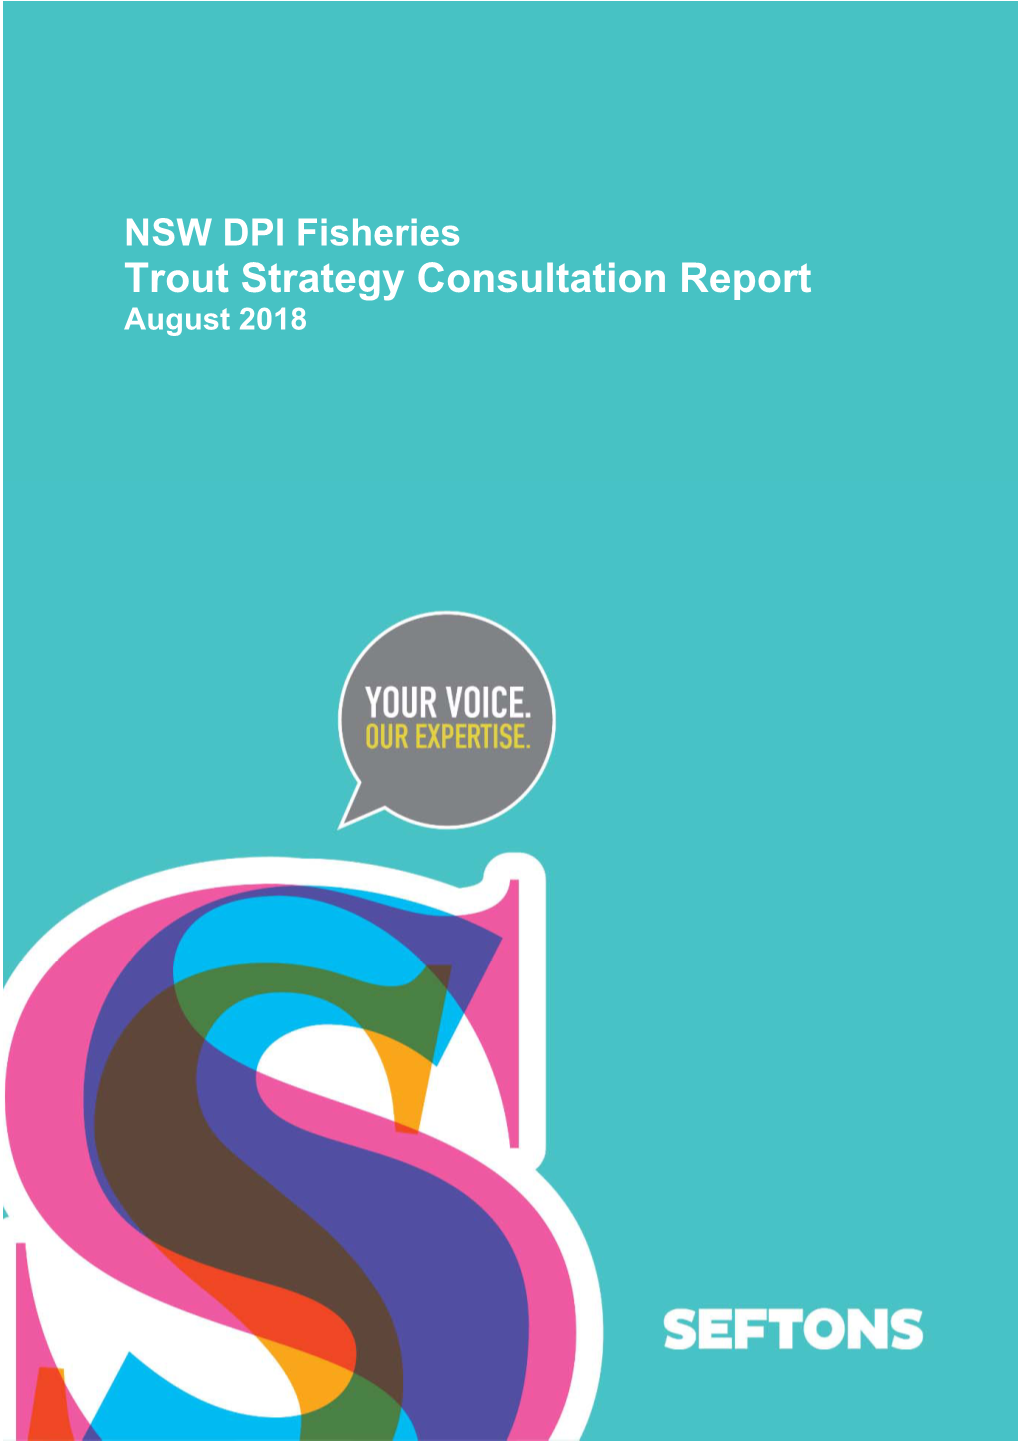 Trout Strategy Consultation Report August 2018